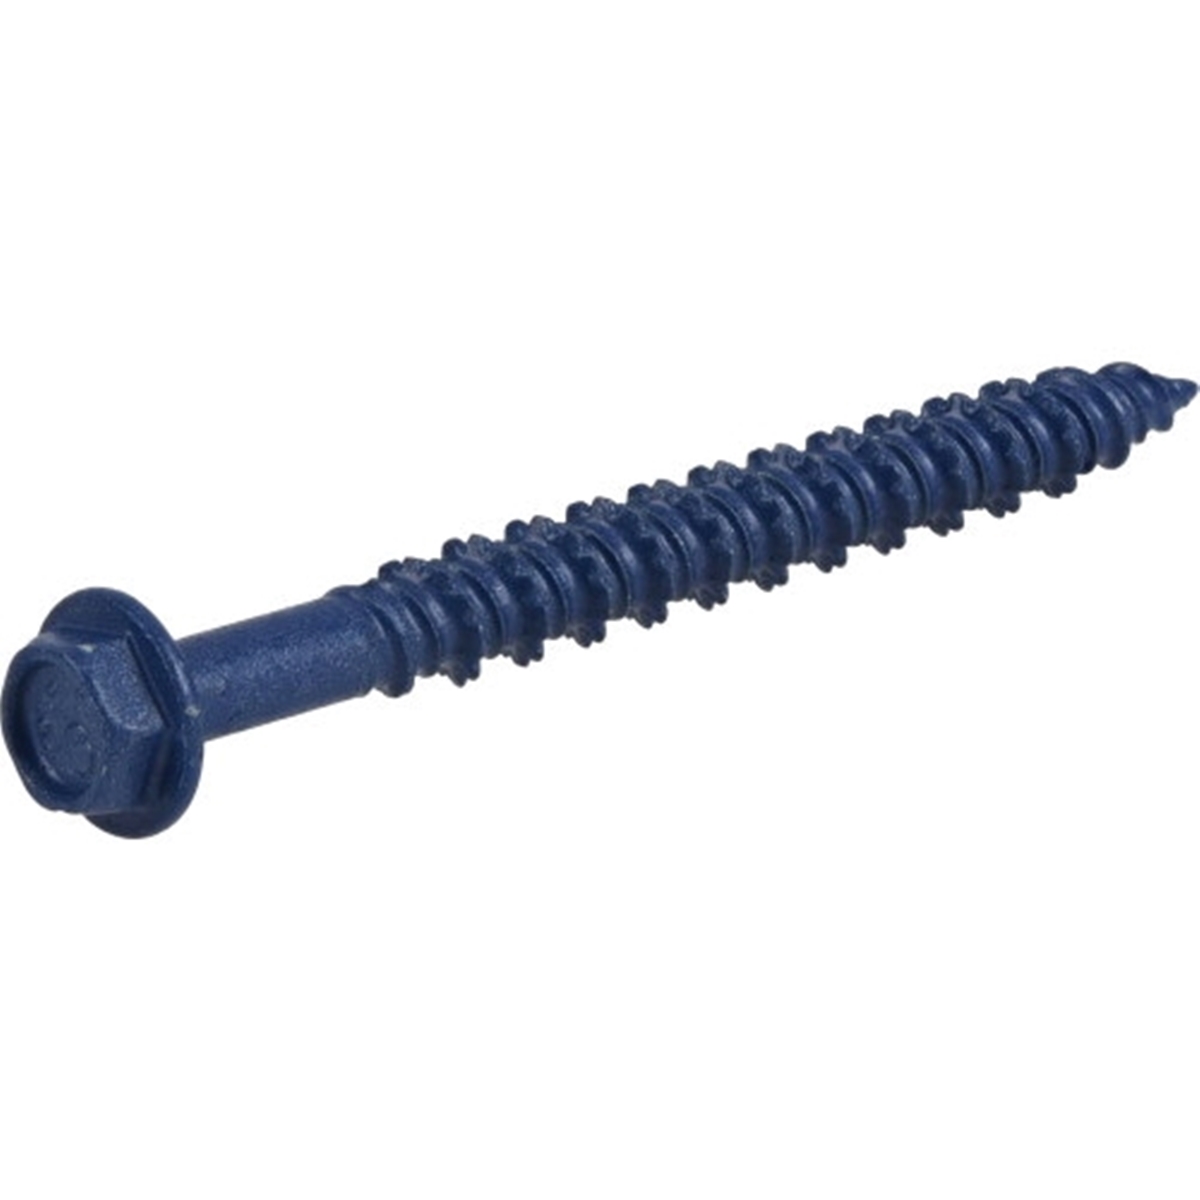 376502 Concrete Screw Anchor, 3/16 in Dia, 2-1/4 in L, Carbon Steel, Epoxy-Coated, 100/PK